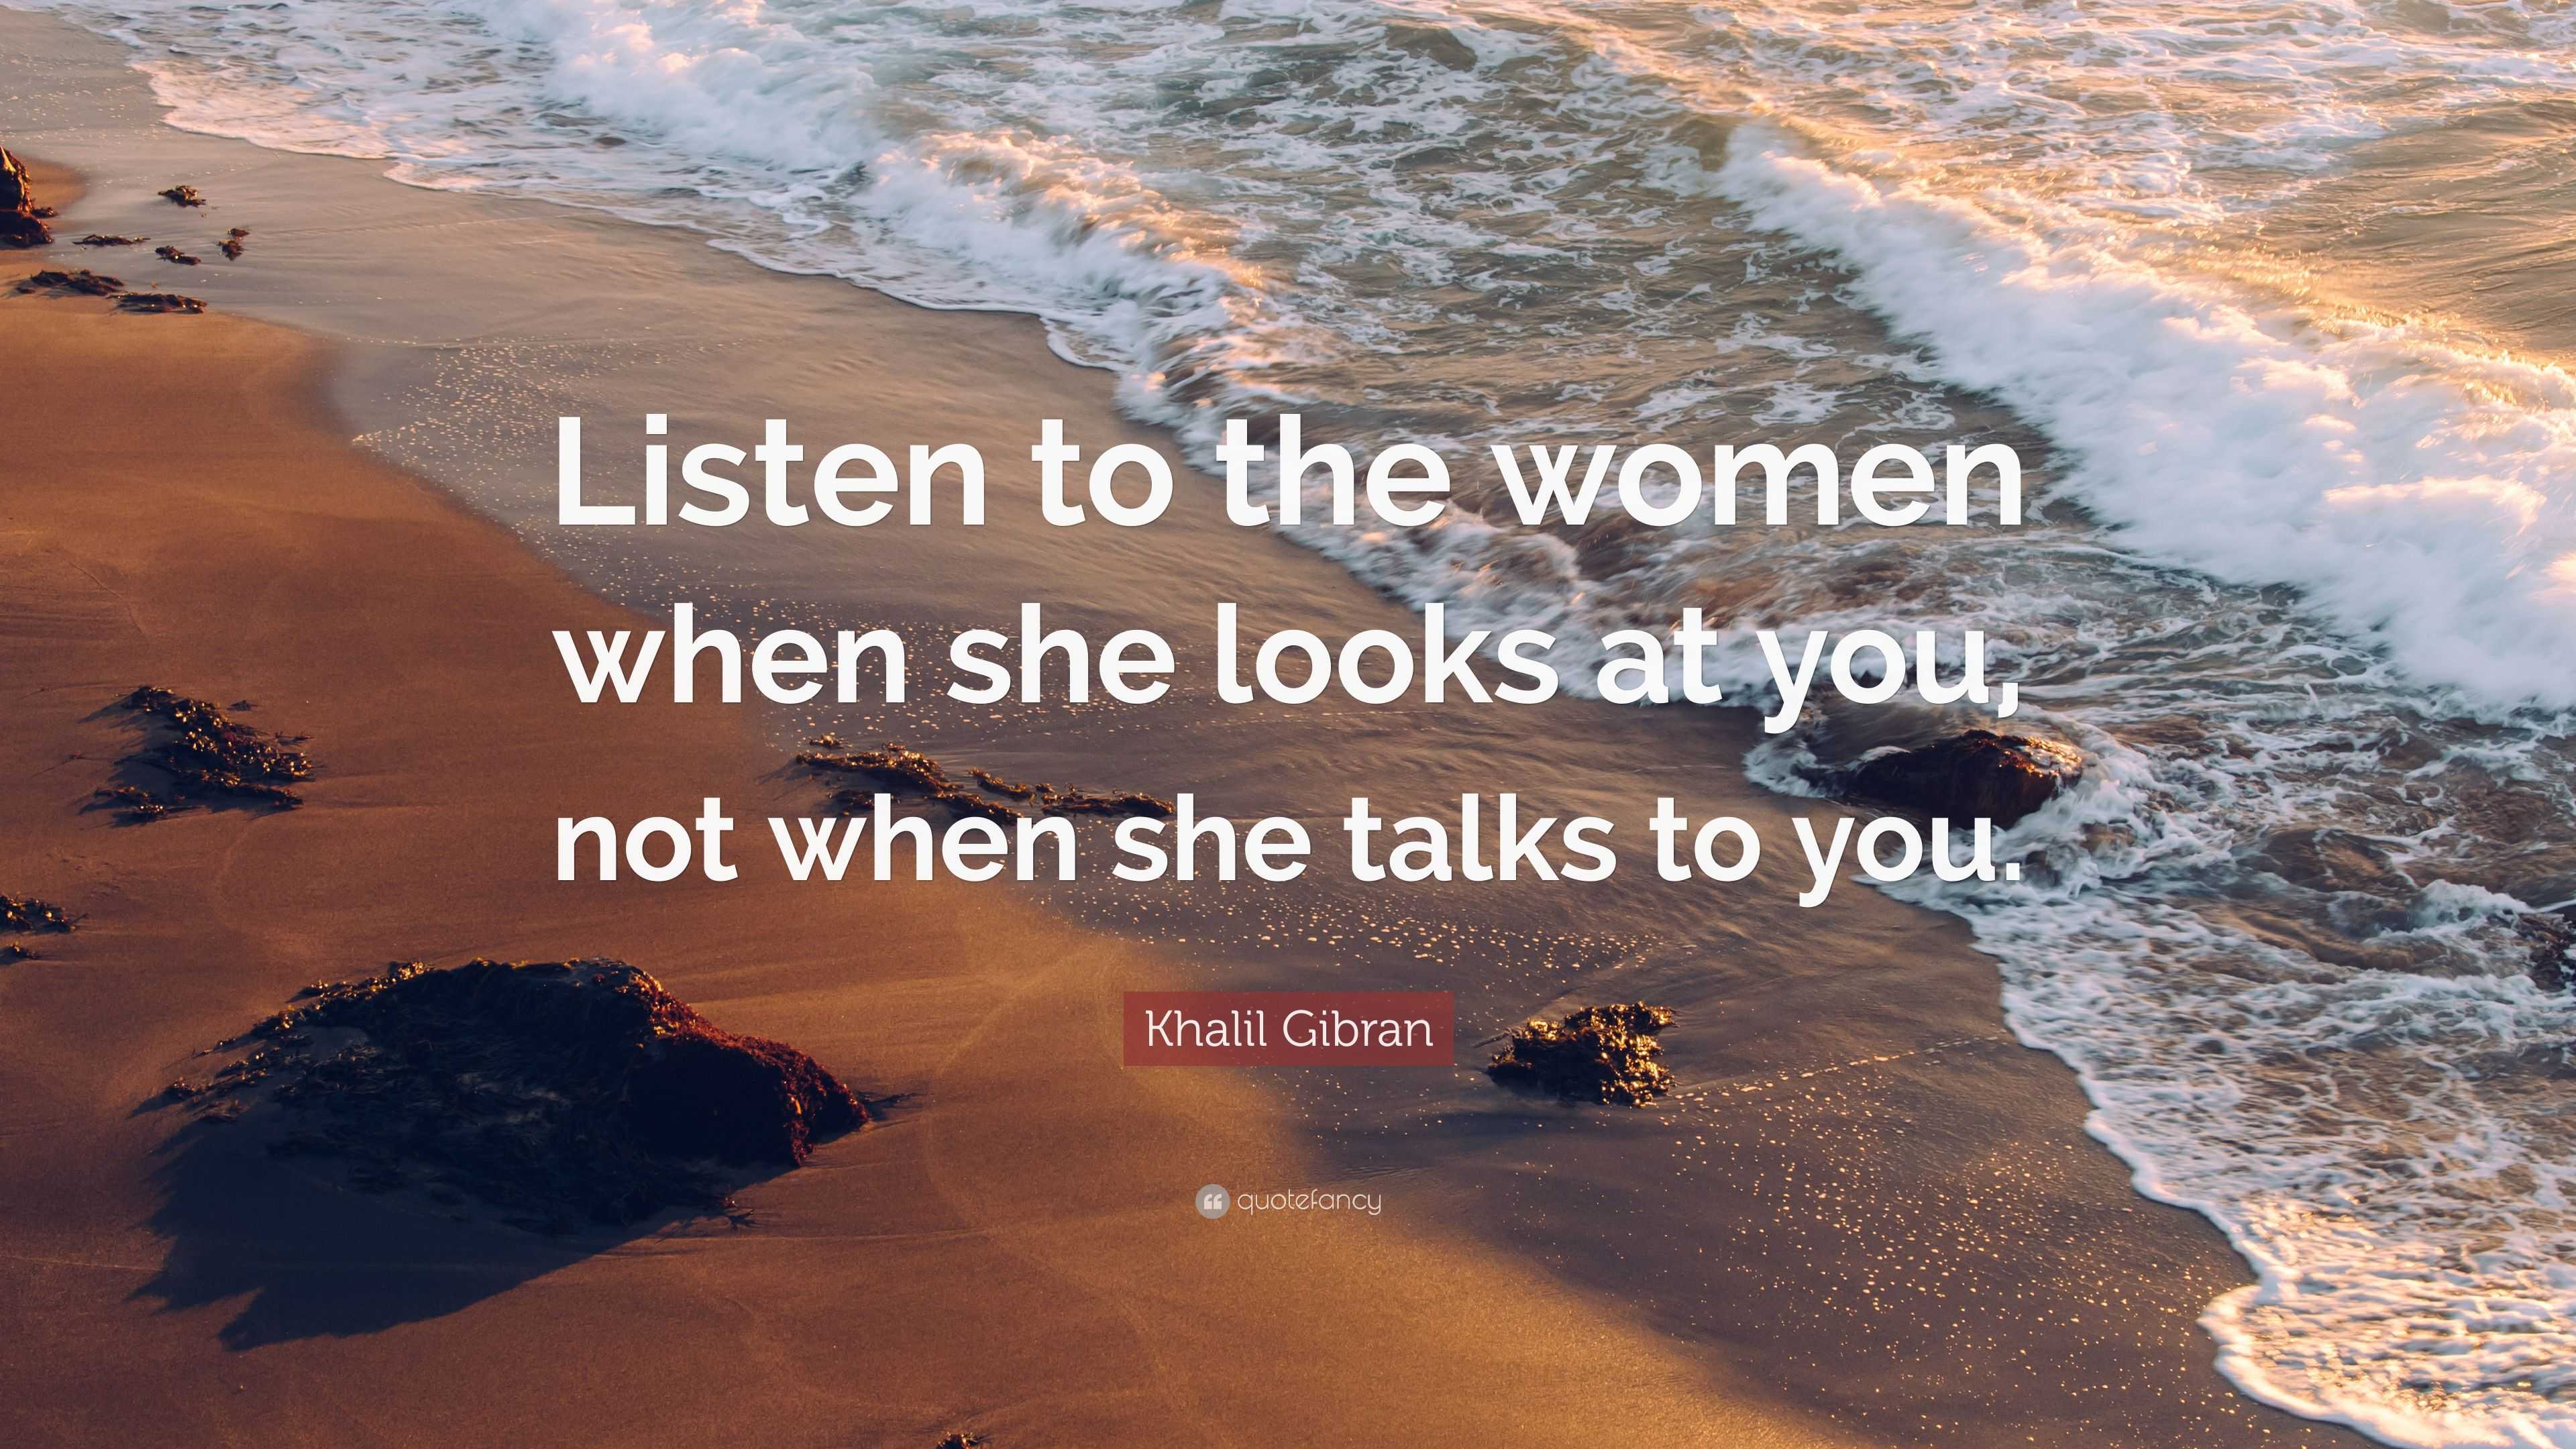 Khalil Gibran Quote: “Listen to the women when she looks at you, not ...